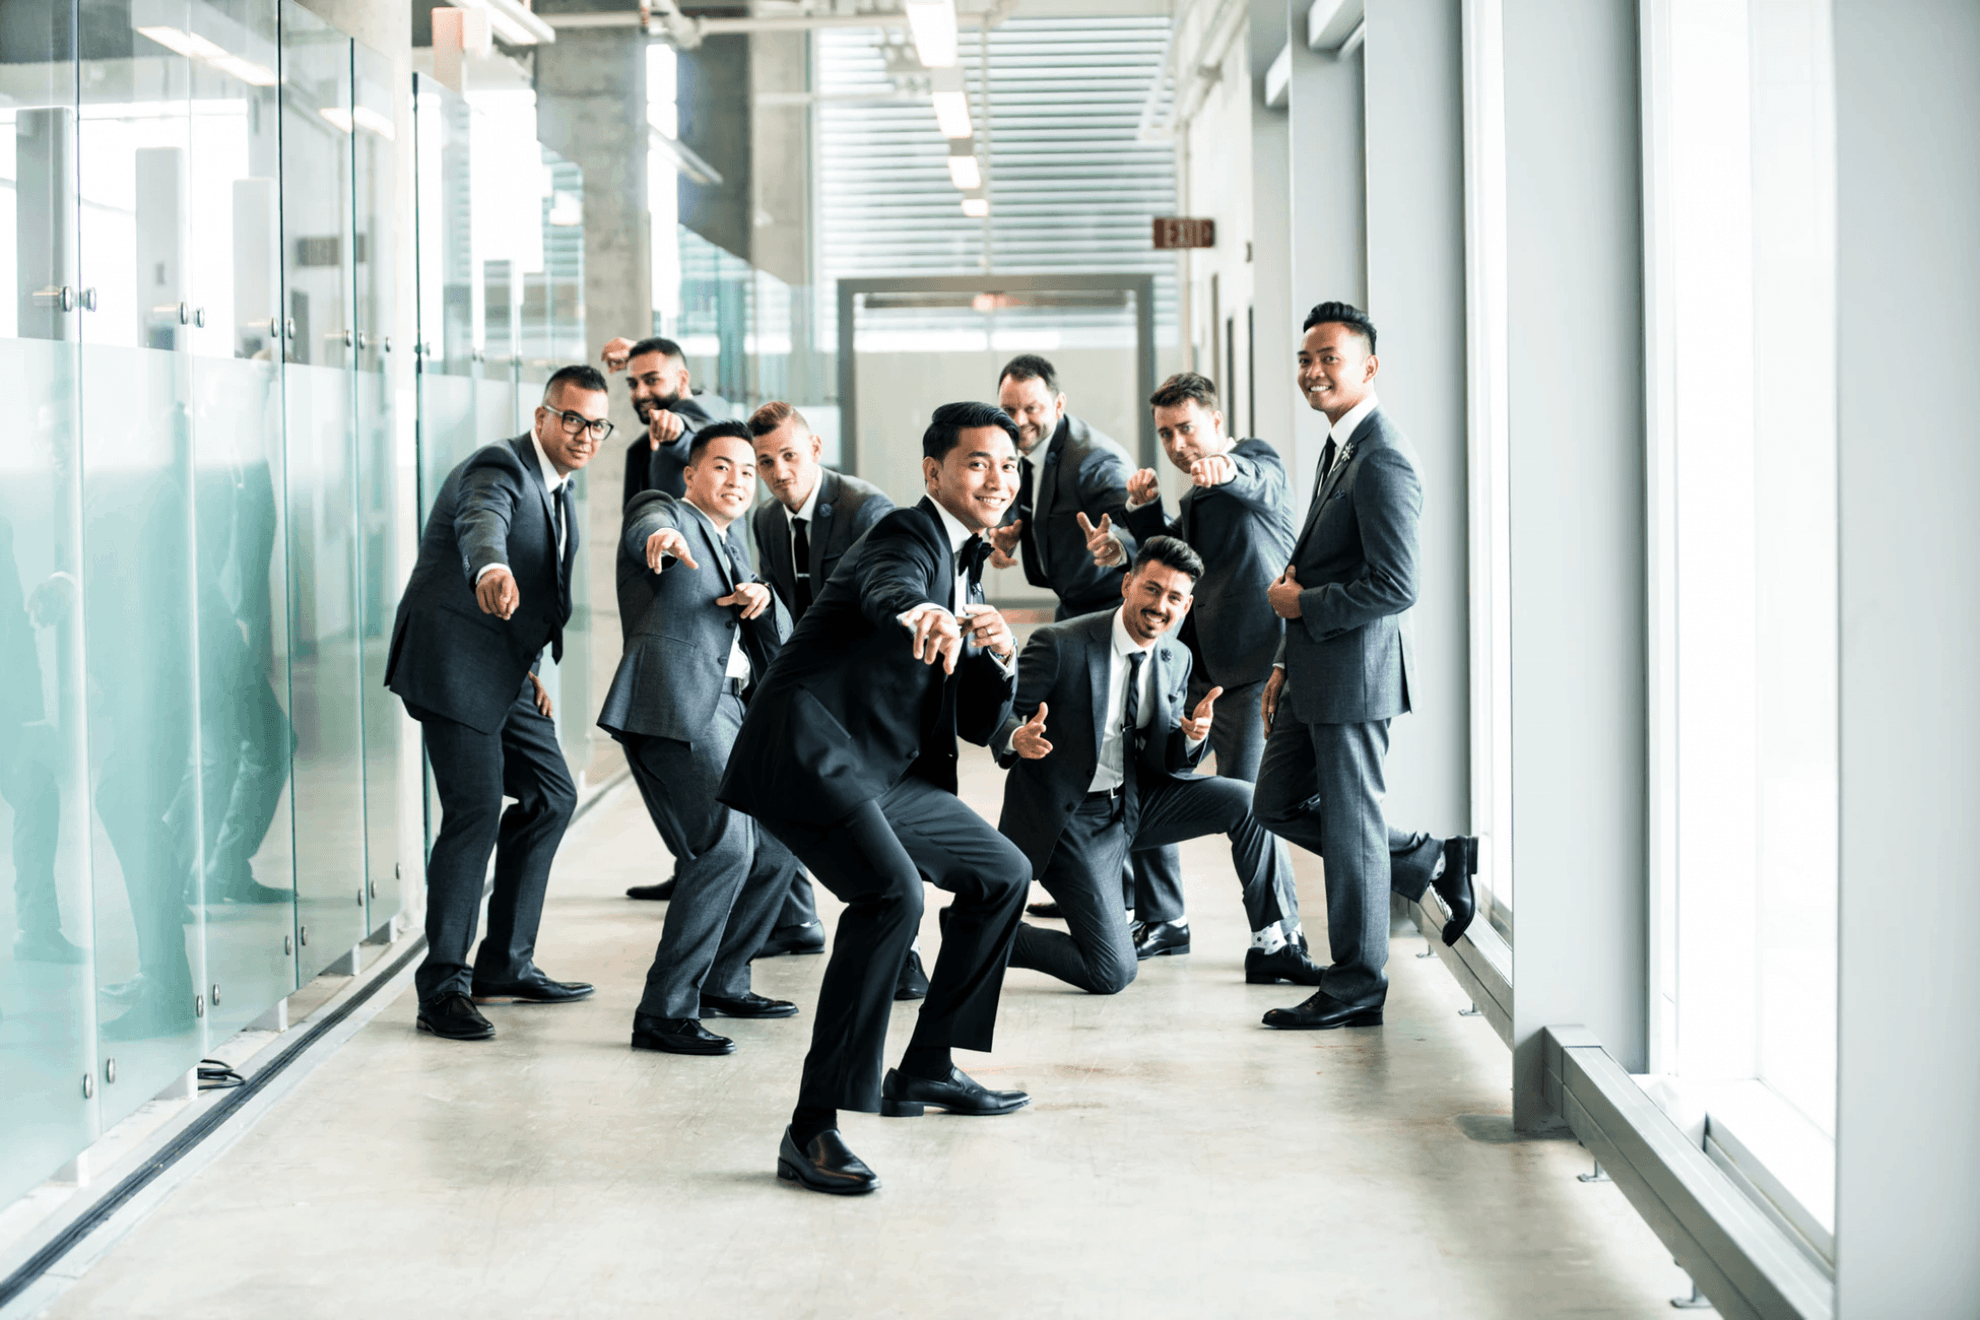 Style Rules for Dressing Your Groomsmen